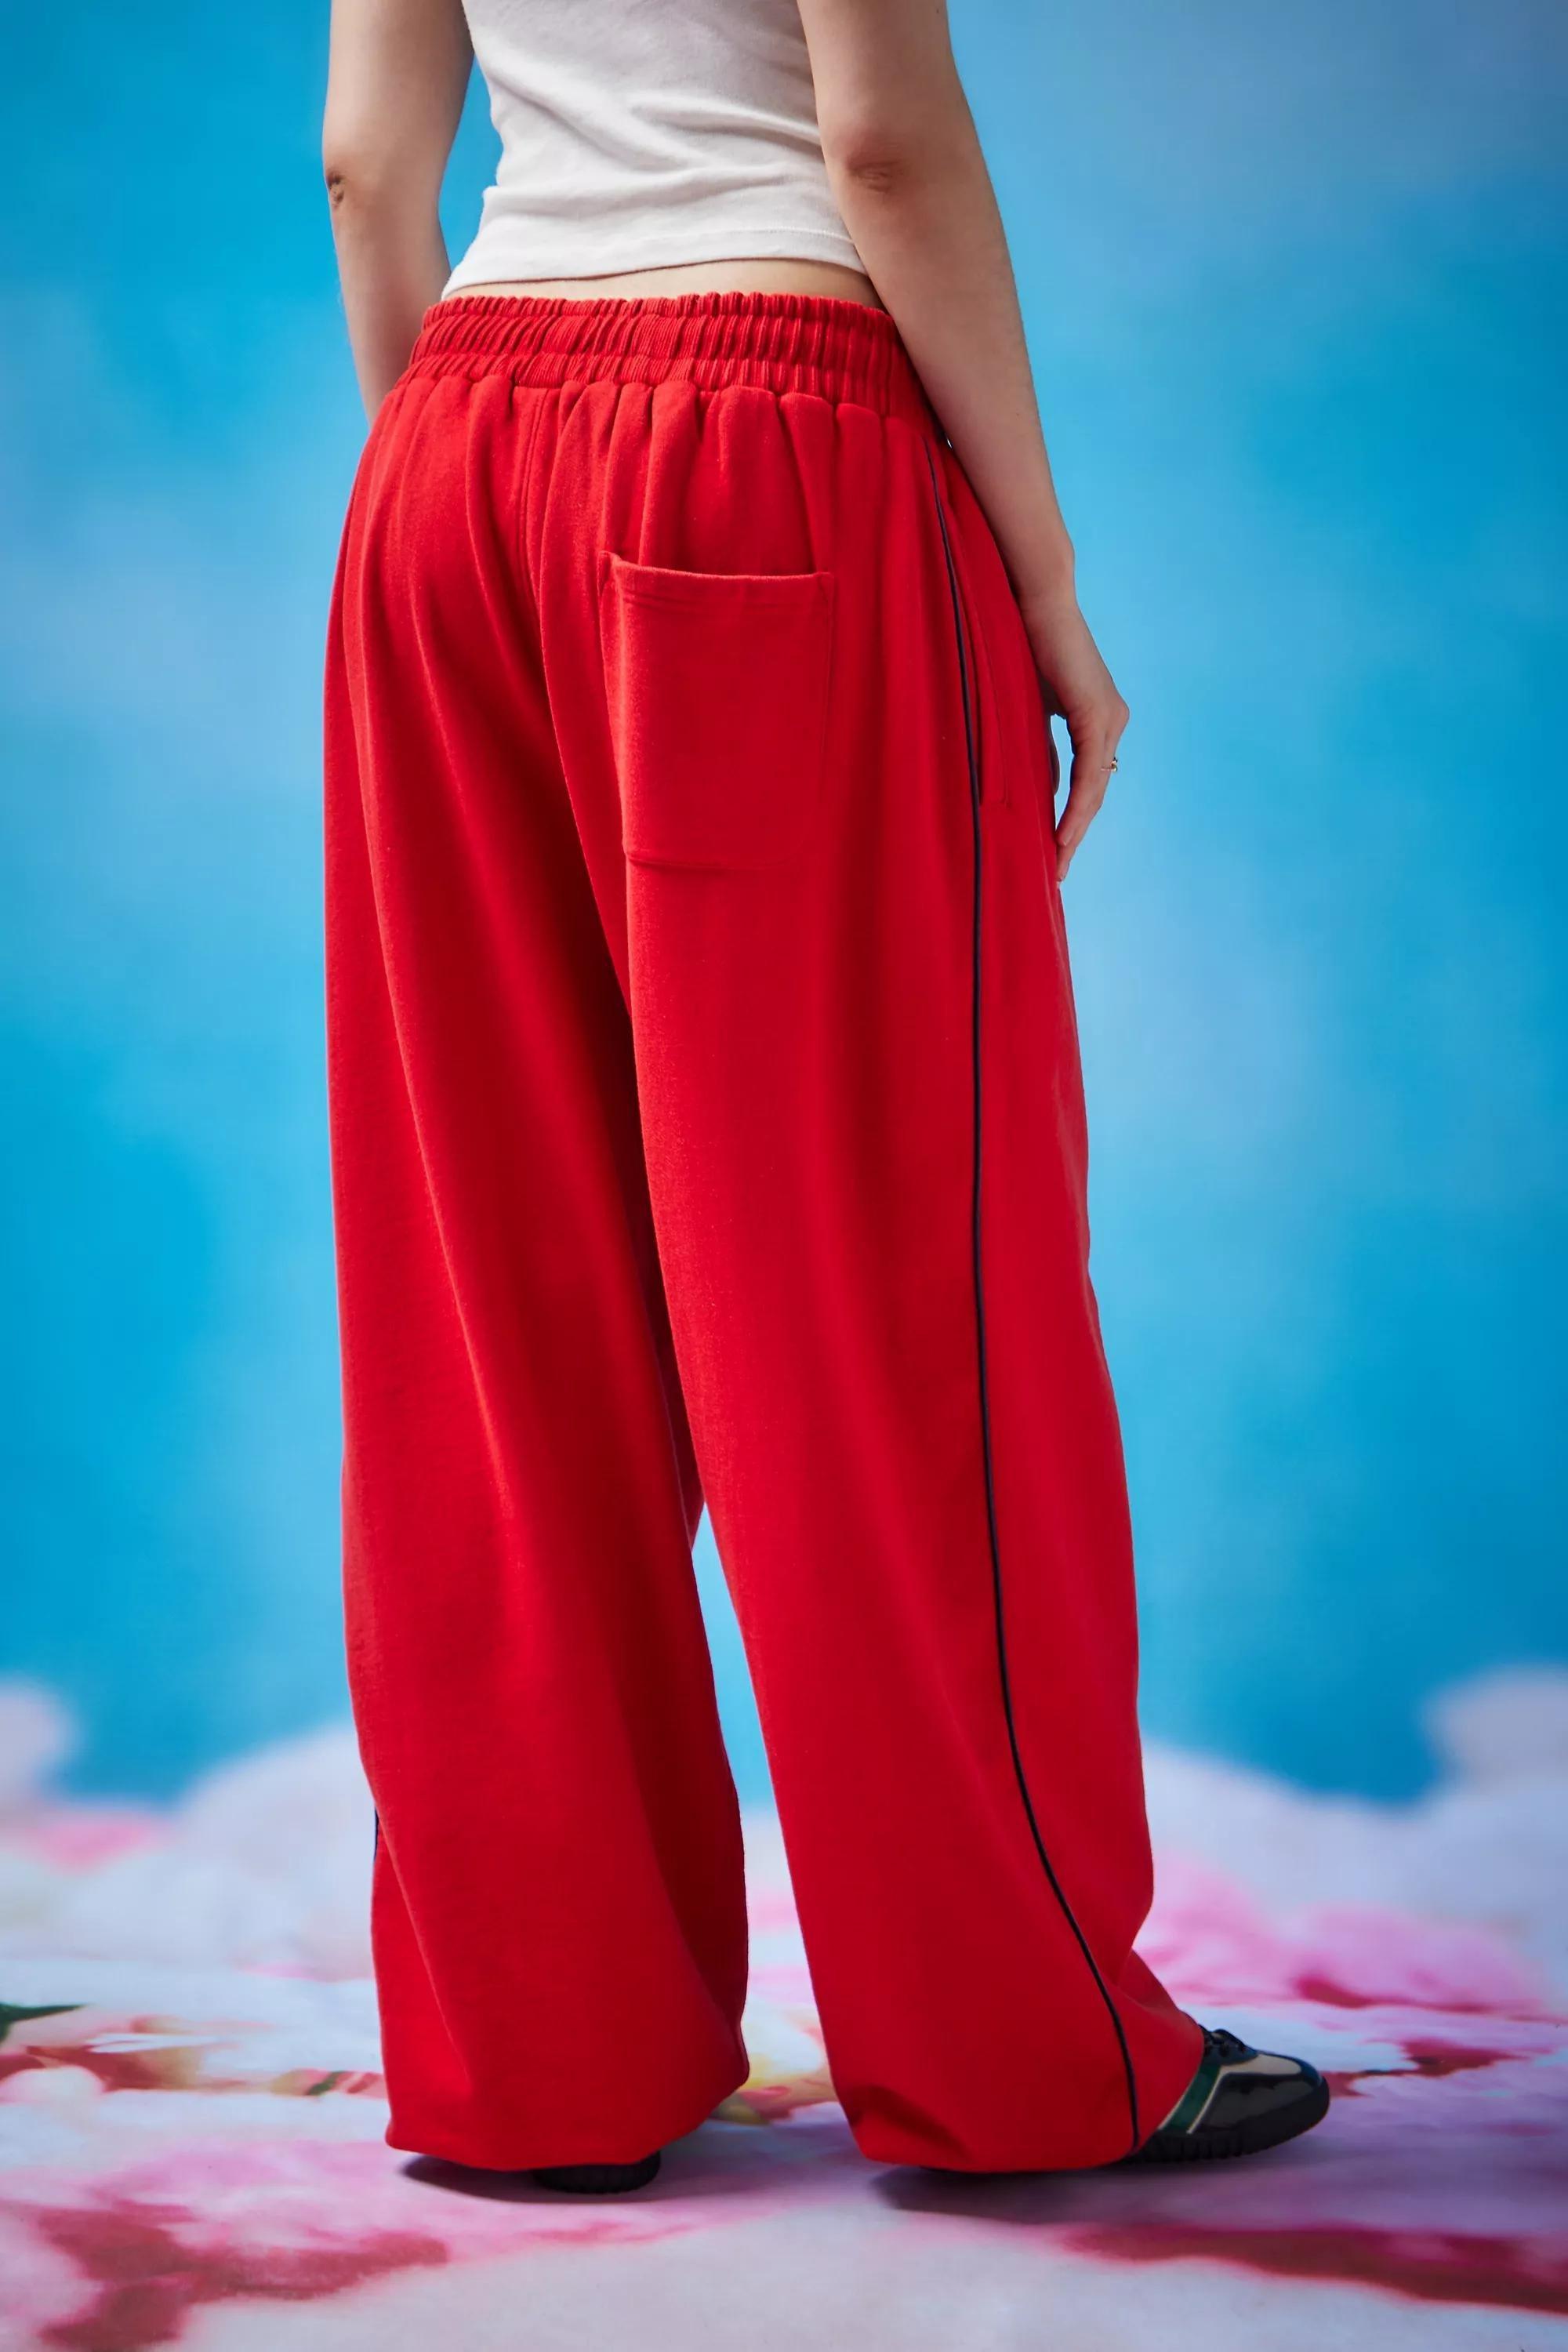 Urban Outfitters - Red Iets Frans... Harri Baggy Joggers